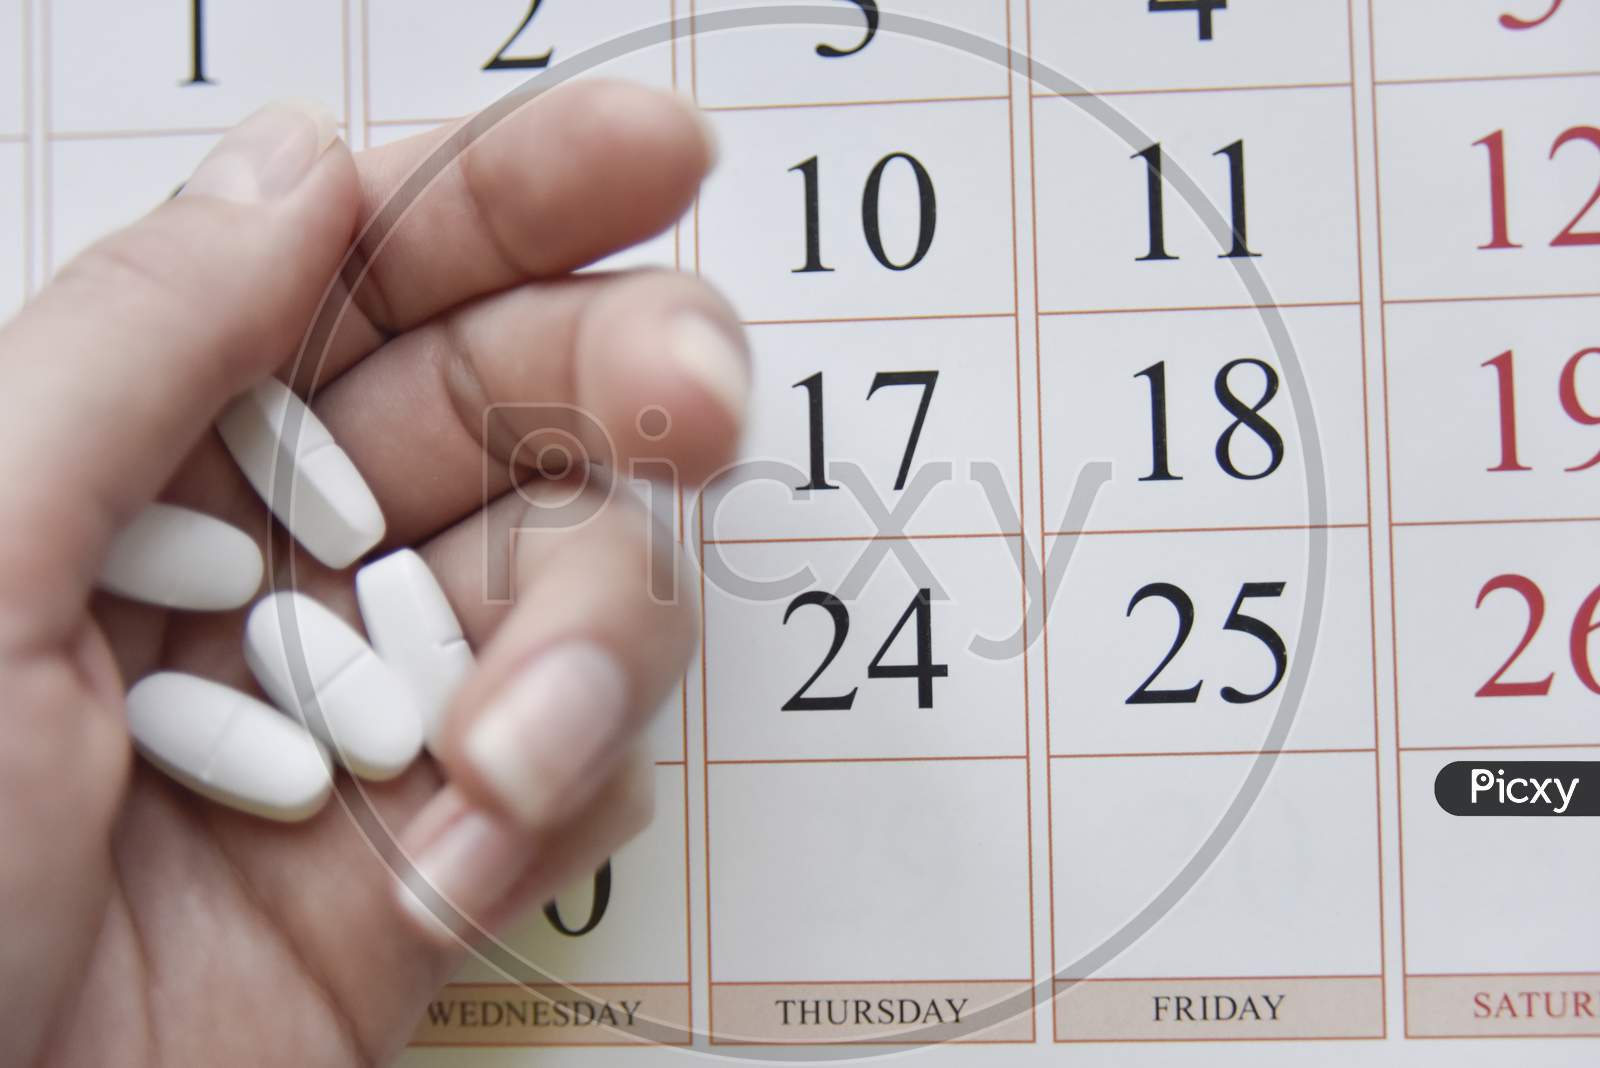 Selective Focus At Pills And Calendar With Blurry Hand